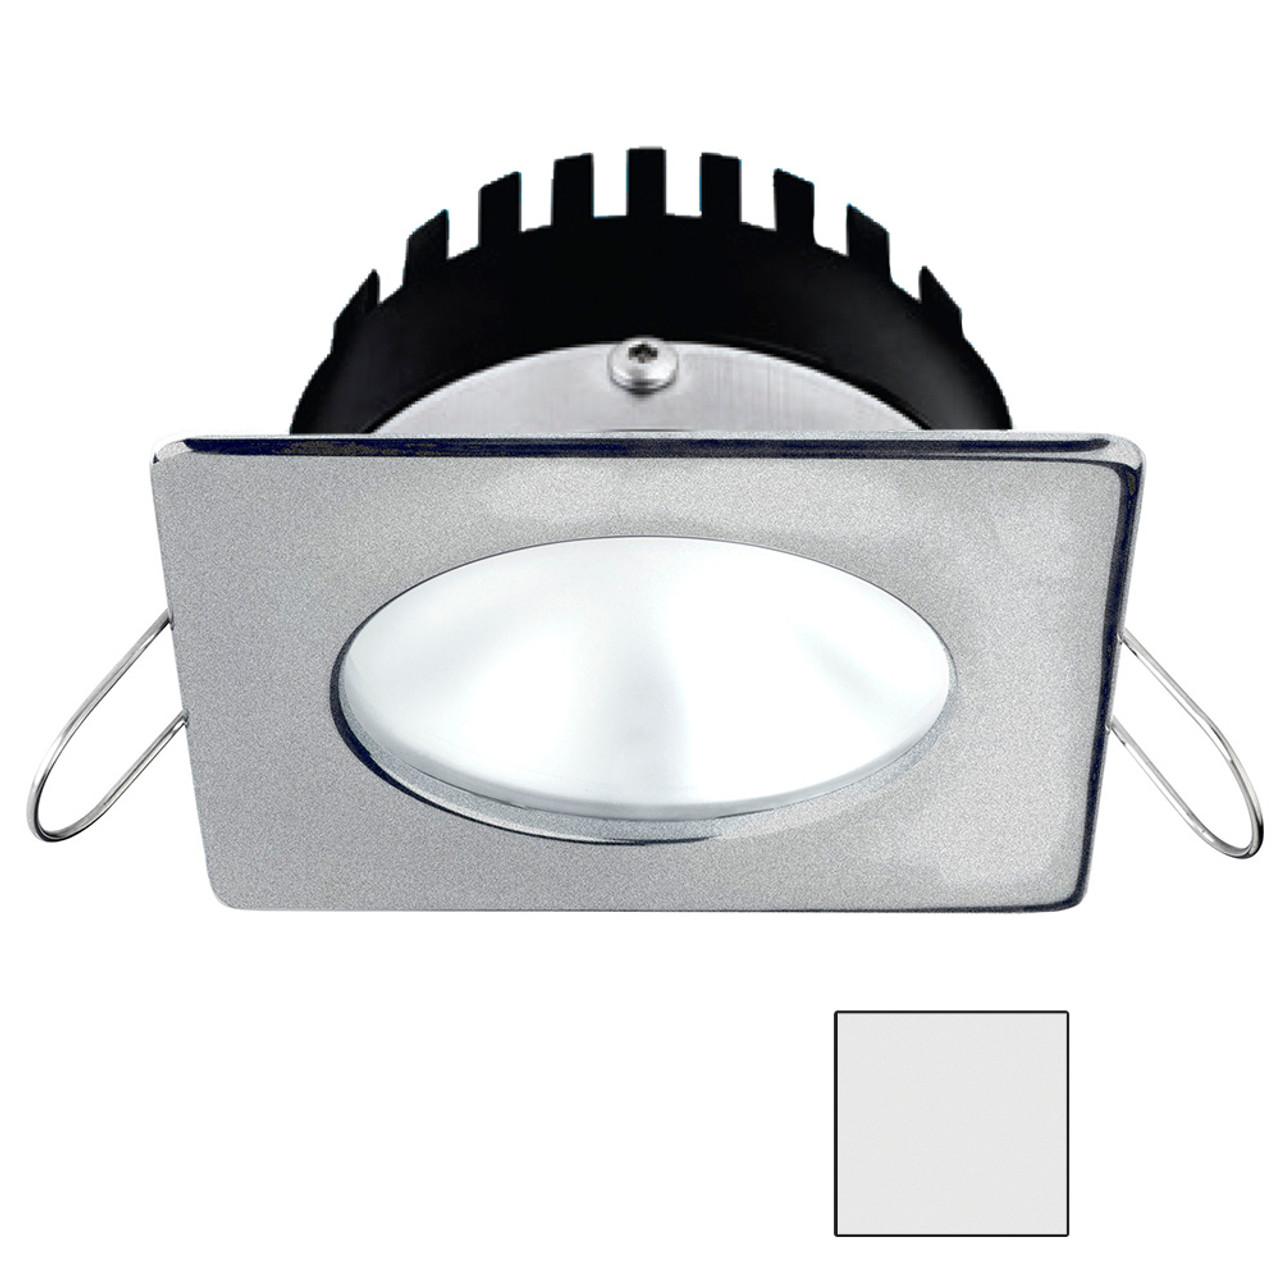 i2Systems - Apeiron PRO A506 - 6W, Spring Mount, Square/Round, Cool White, Brushed Nickel Finish - Apollo Lighting